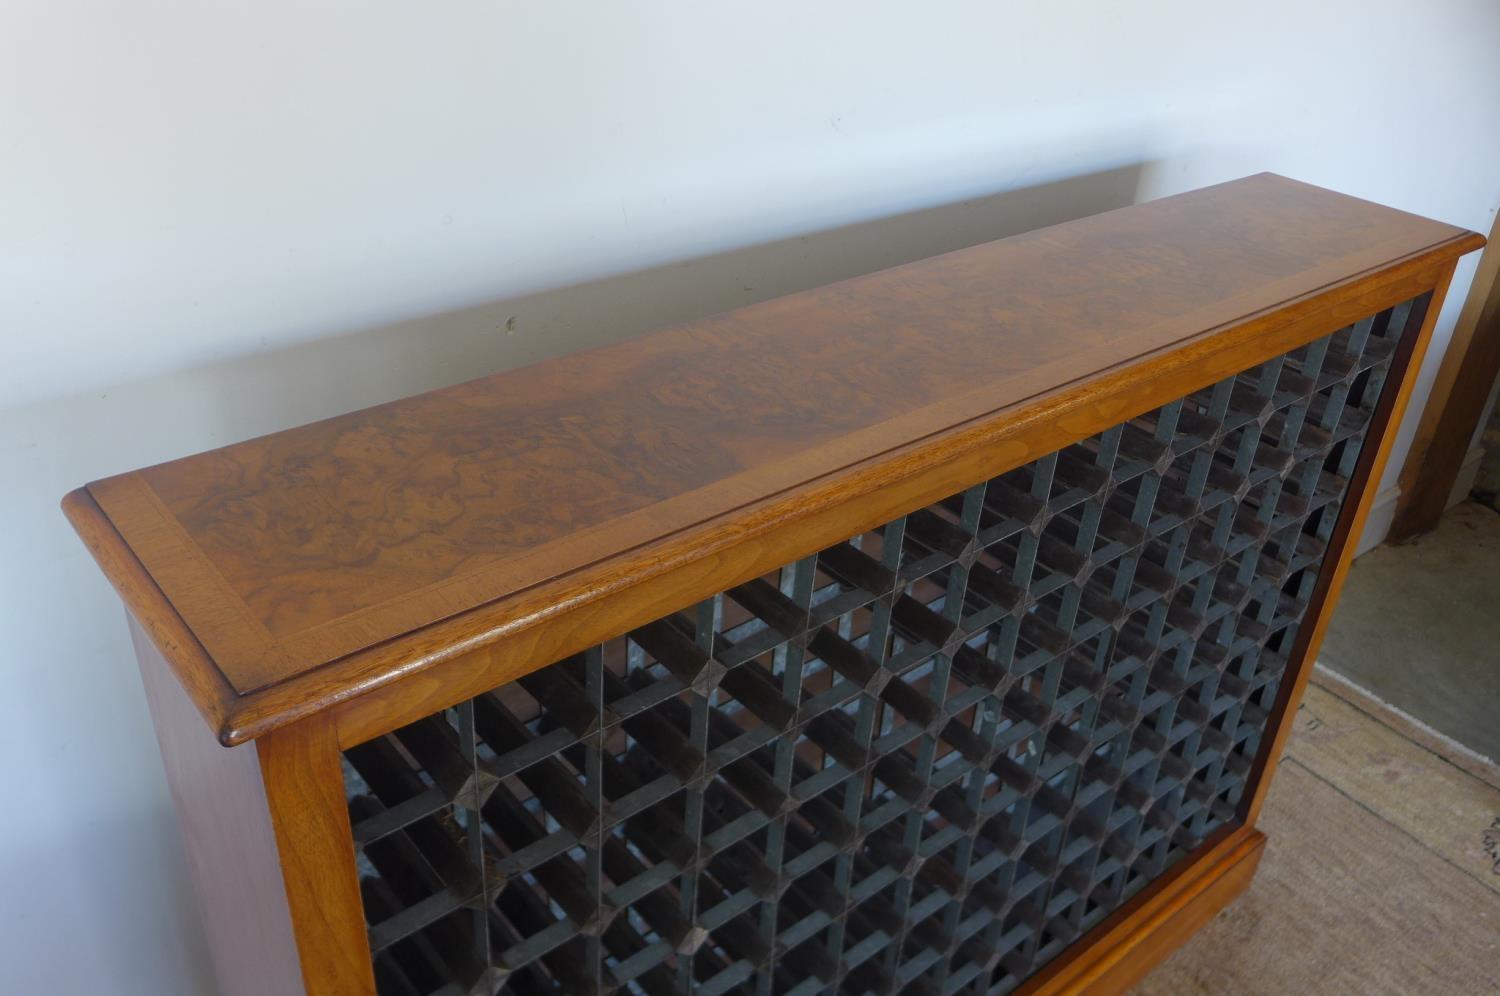 A walnut, 126 bottle capacity wine rack, approx 148cm W, 110cm H, 28cm D - made by a local craftsman - Image 2 of 2